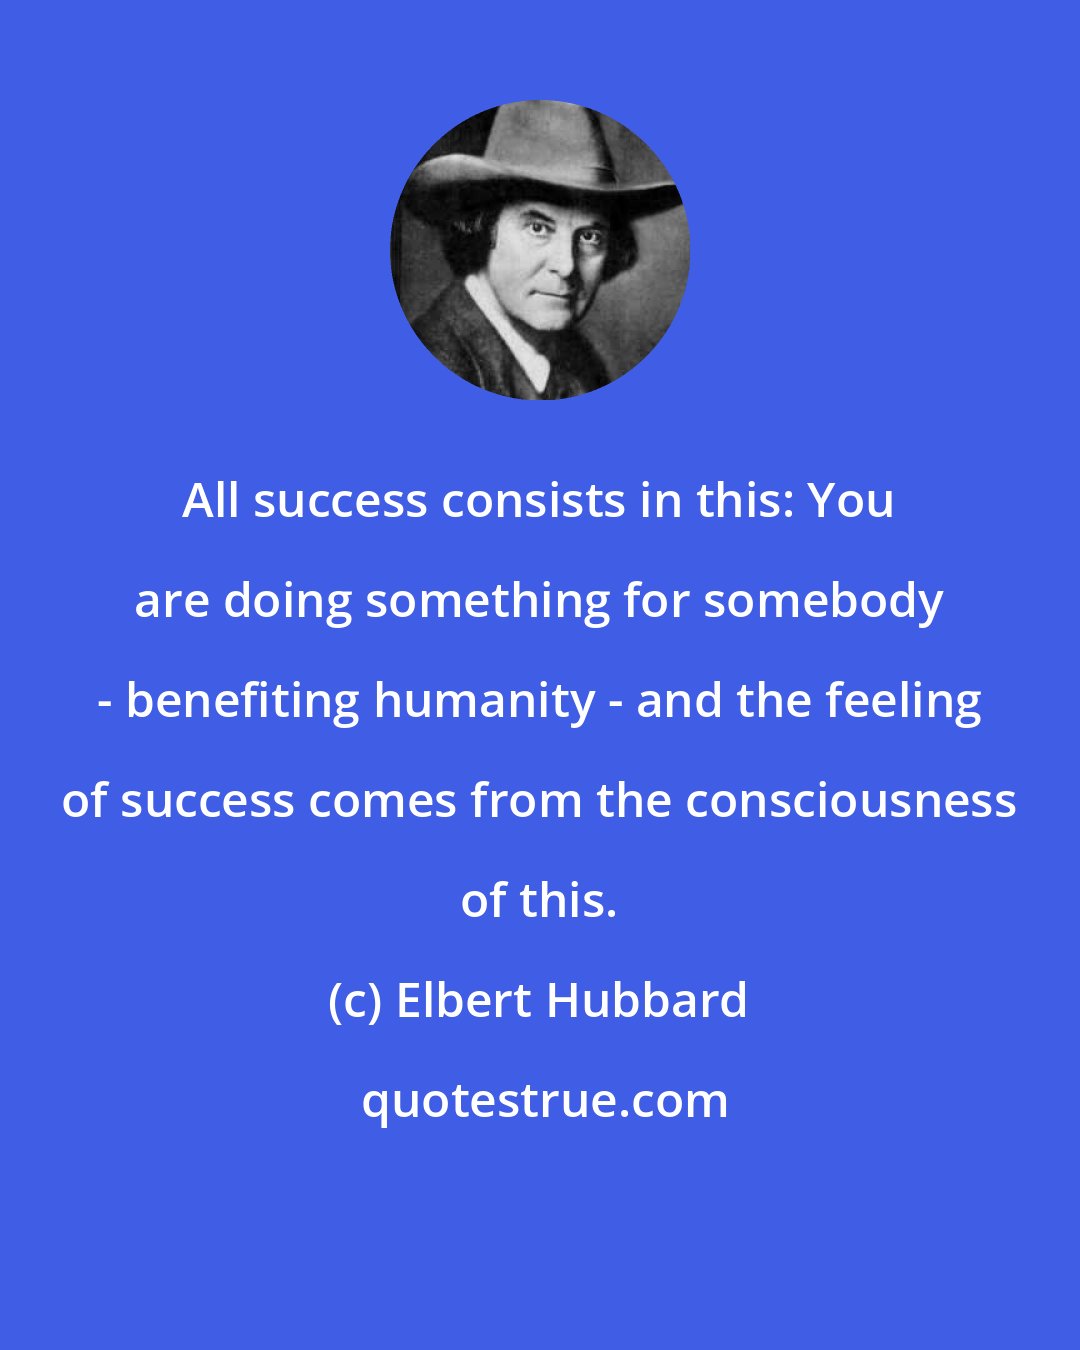 Elbert Hubbard: All success consists in this: You are doing something for somebody - benefiting humanity - and the feeling of success comes from the consciousness of this.